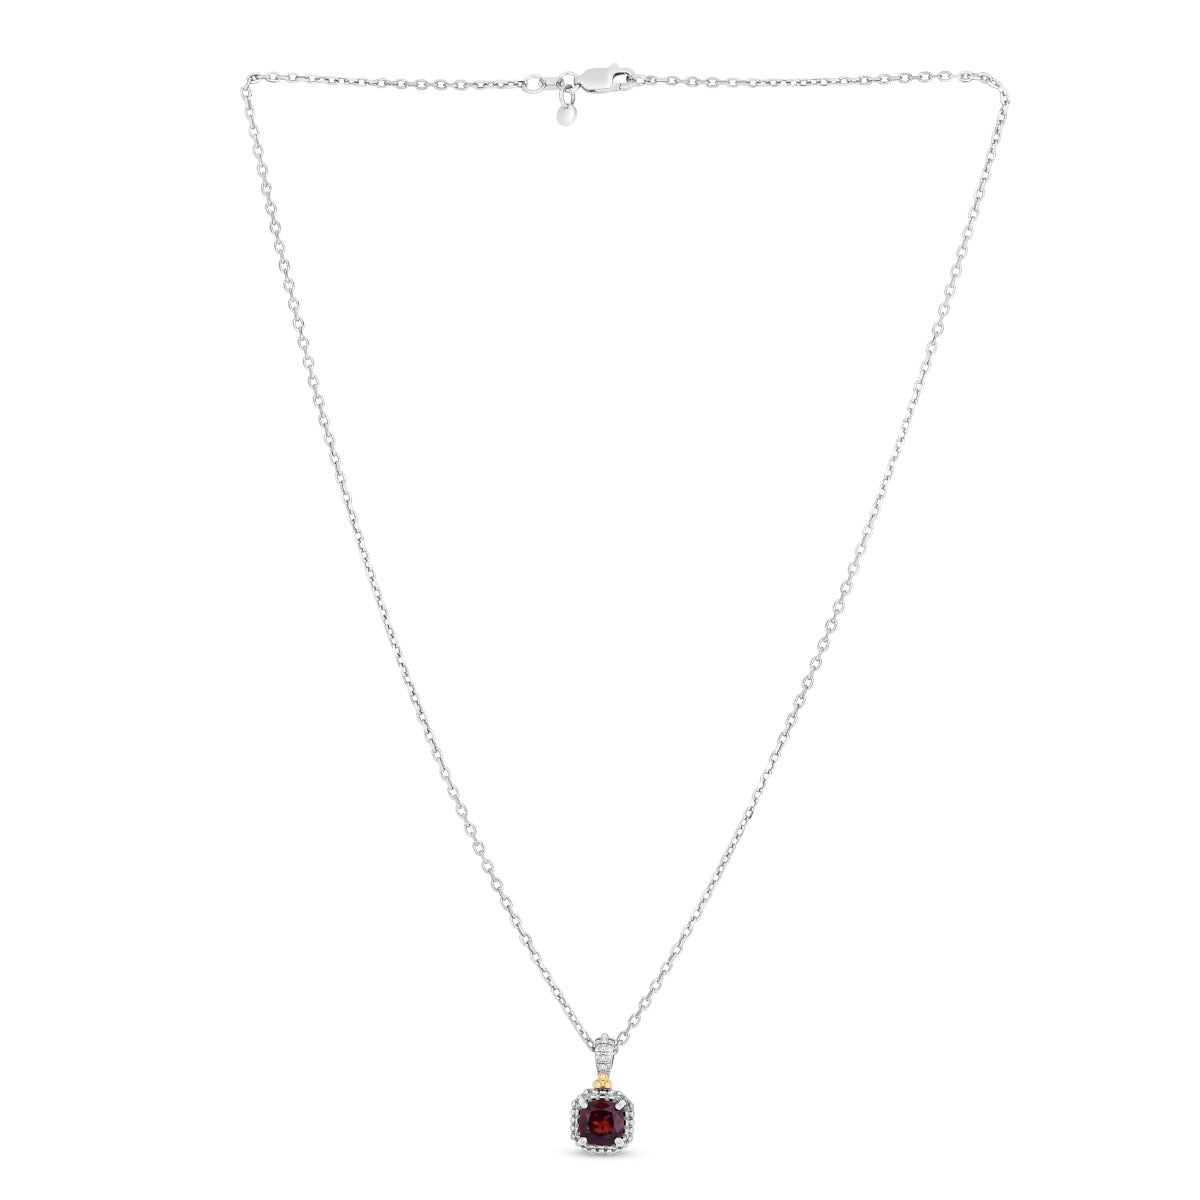 18K Gold & Sterling Silver Drop Necklace with Gemstones on Cable Chain with Lobster Clasp